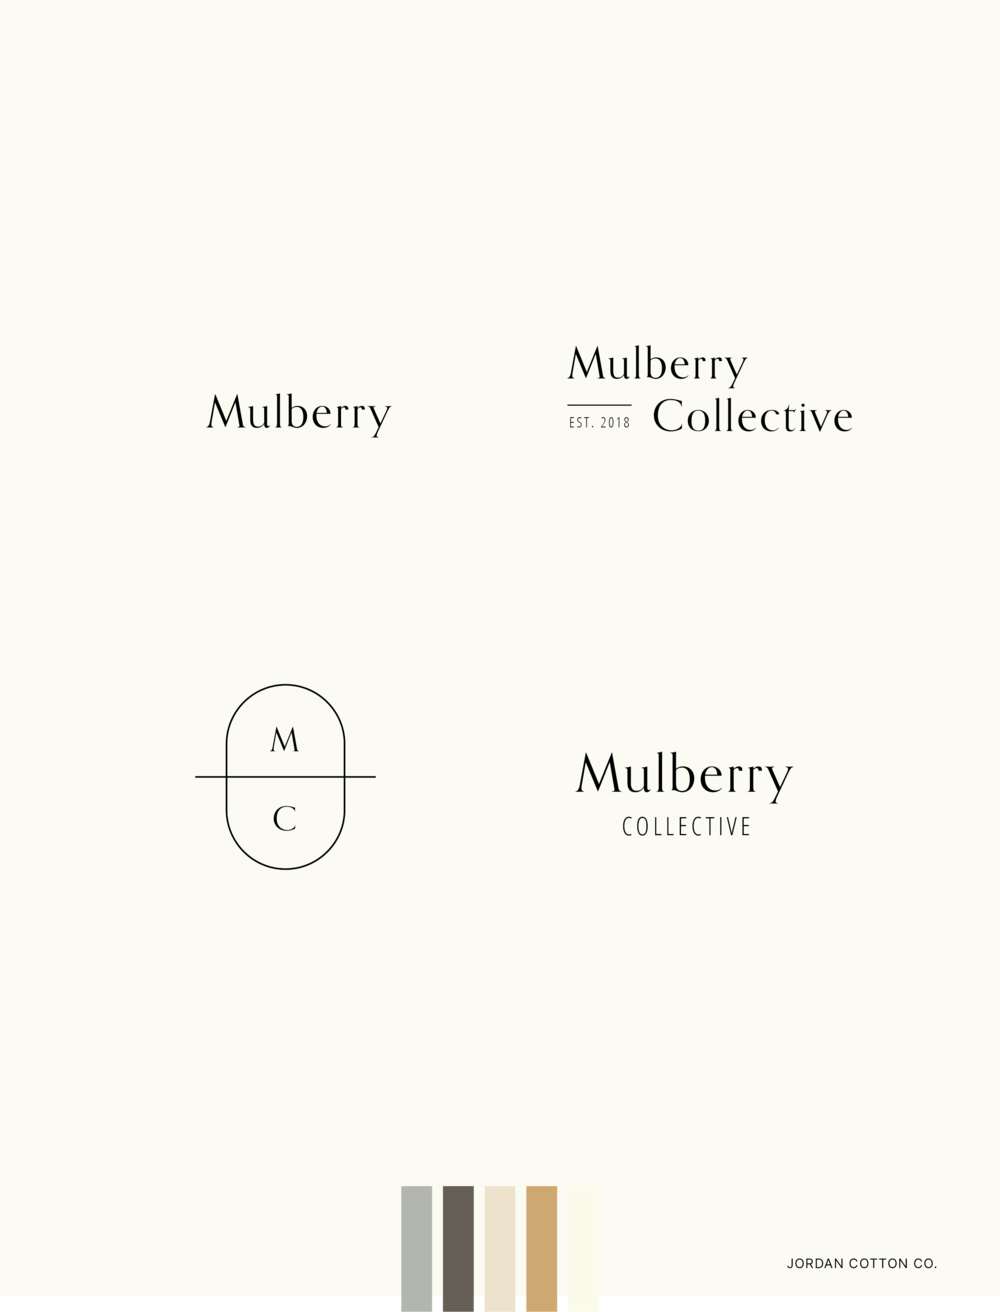 Mulberry Collective brand kit by Jordan Cotton as an example of one of 5 Brand Kit Examples to Inspire Your Brand Identity.